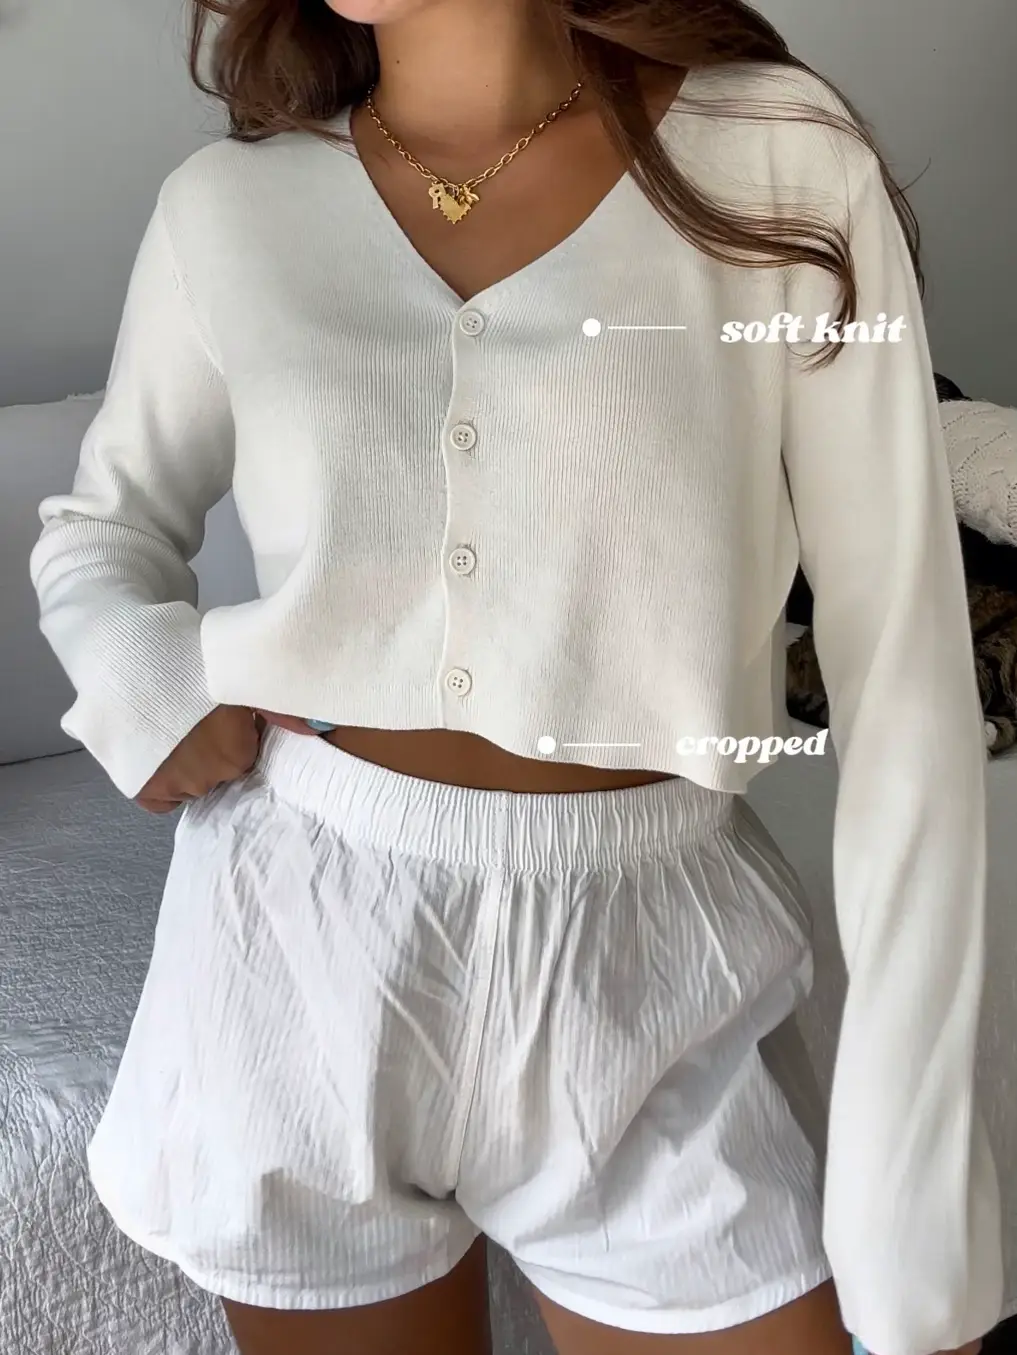 Brandy Melville Try on Haul!!  Gallery posted by Ashley Nicole